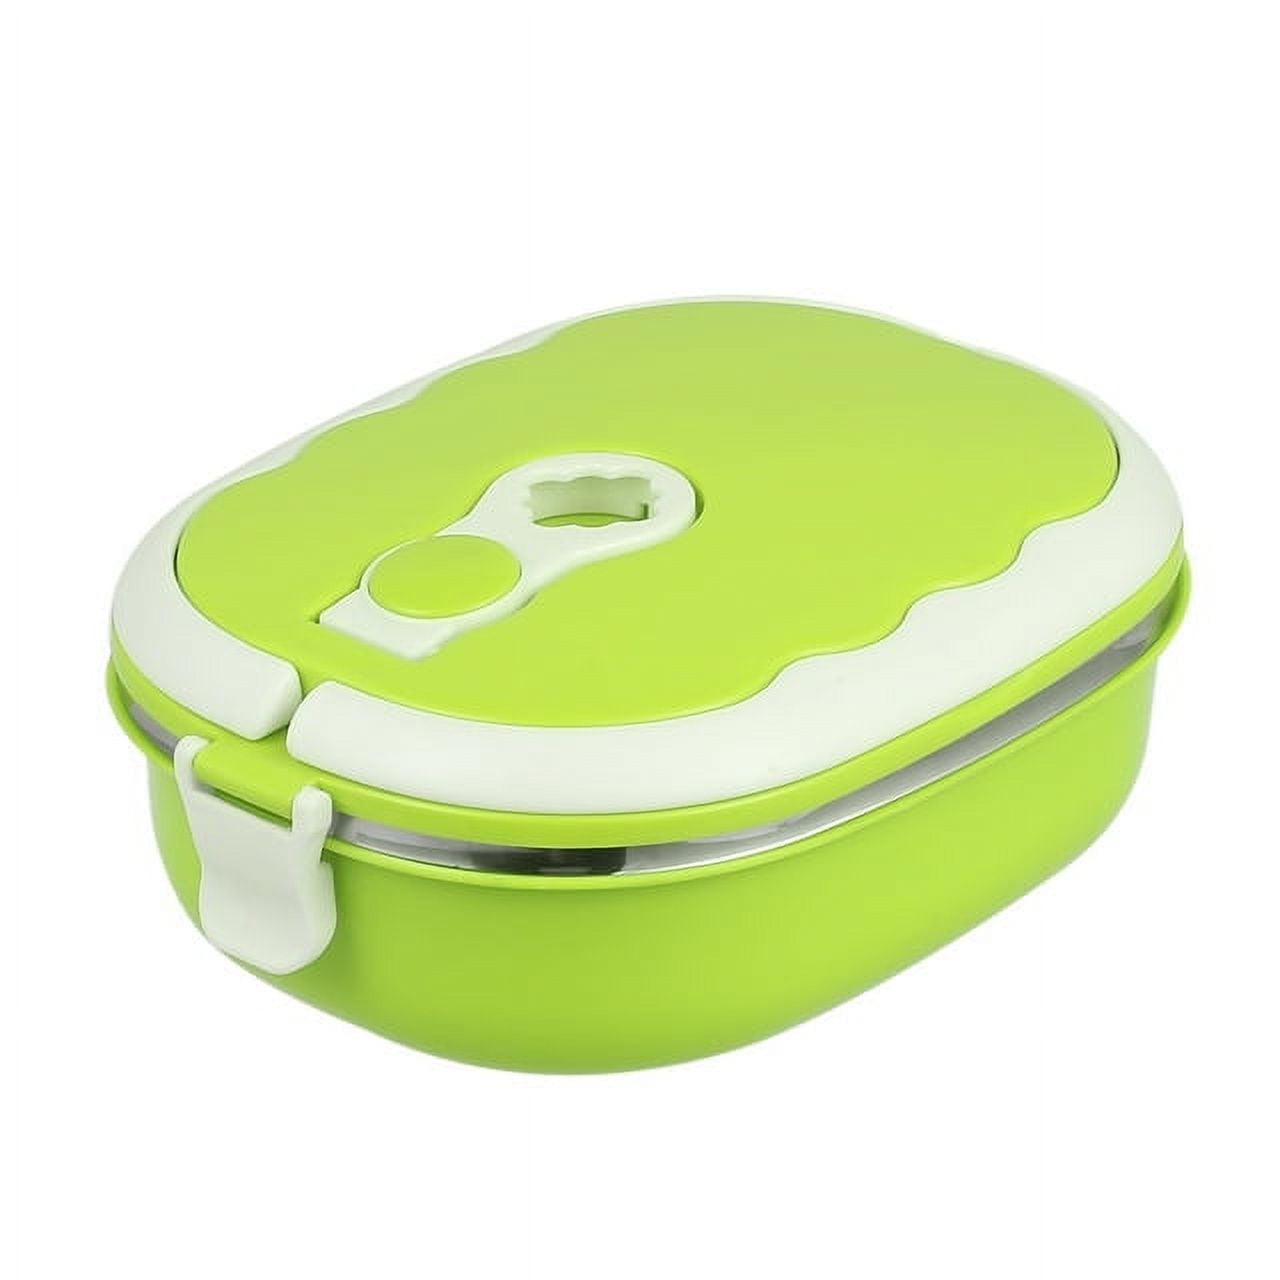 Willstar Box 900ML Stainless Steel Thermal Lunch Box Single Layer Food Containers with Thermal Insulation Arch Handle Leakproof Food Storage for Adult Kid Student Work School (Green)